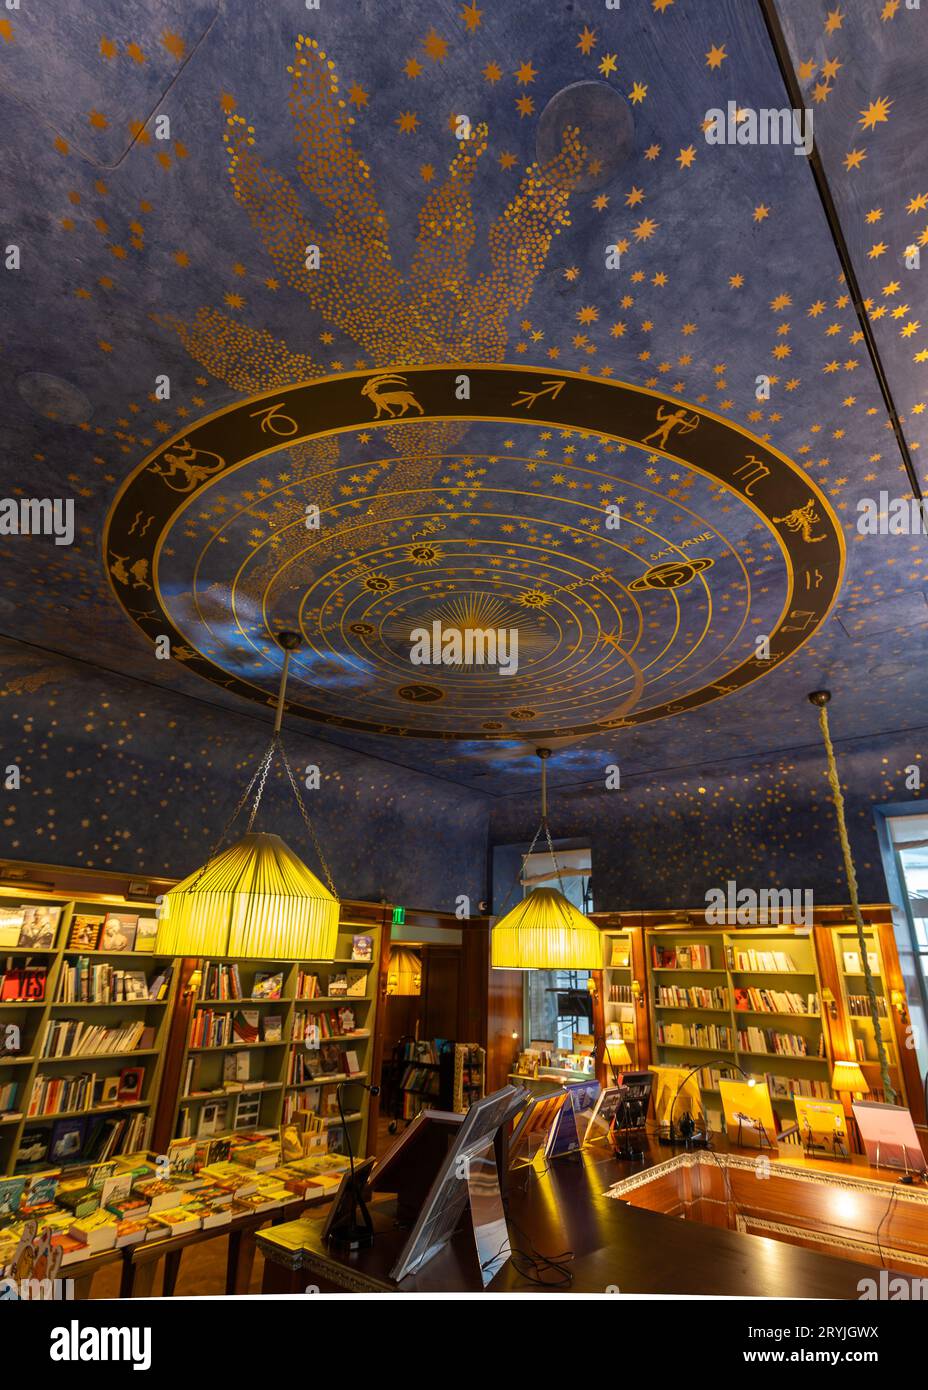 09.18.23. USA, New York city, Manhattan. children's section of the Albertine bookstore next to central park. Amazing freco is on the roof. Stock Photo